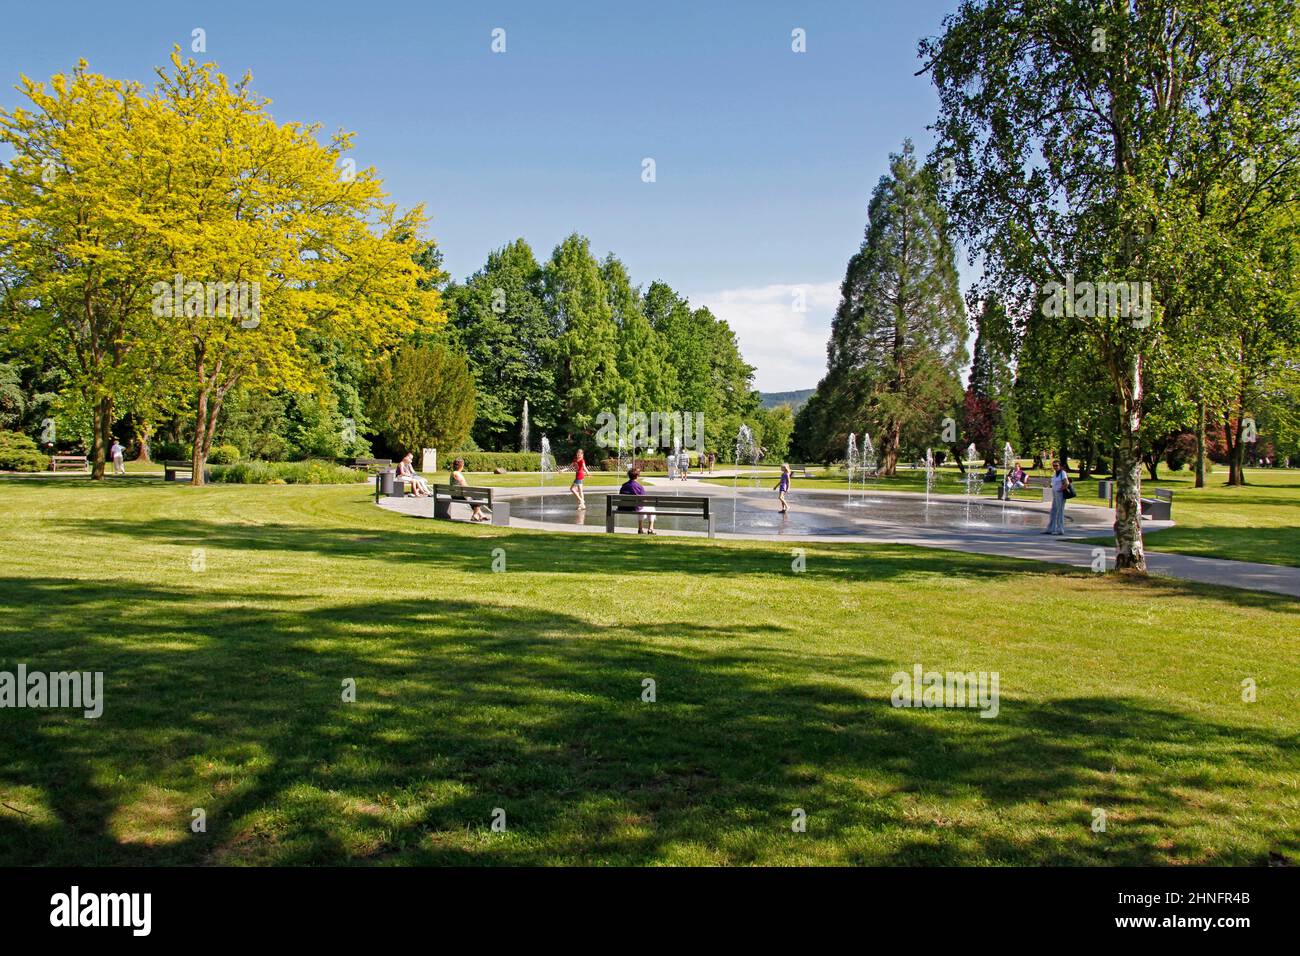 Spa park, fountain, spa guests, Bad Soden-Salmuenster, Hesse, Germany Stock Photo